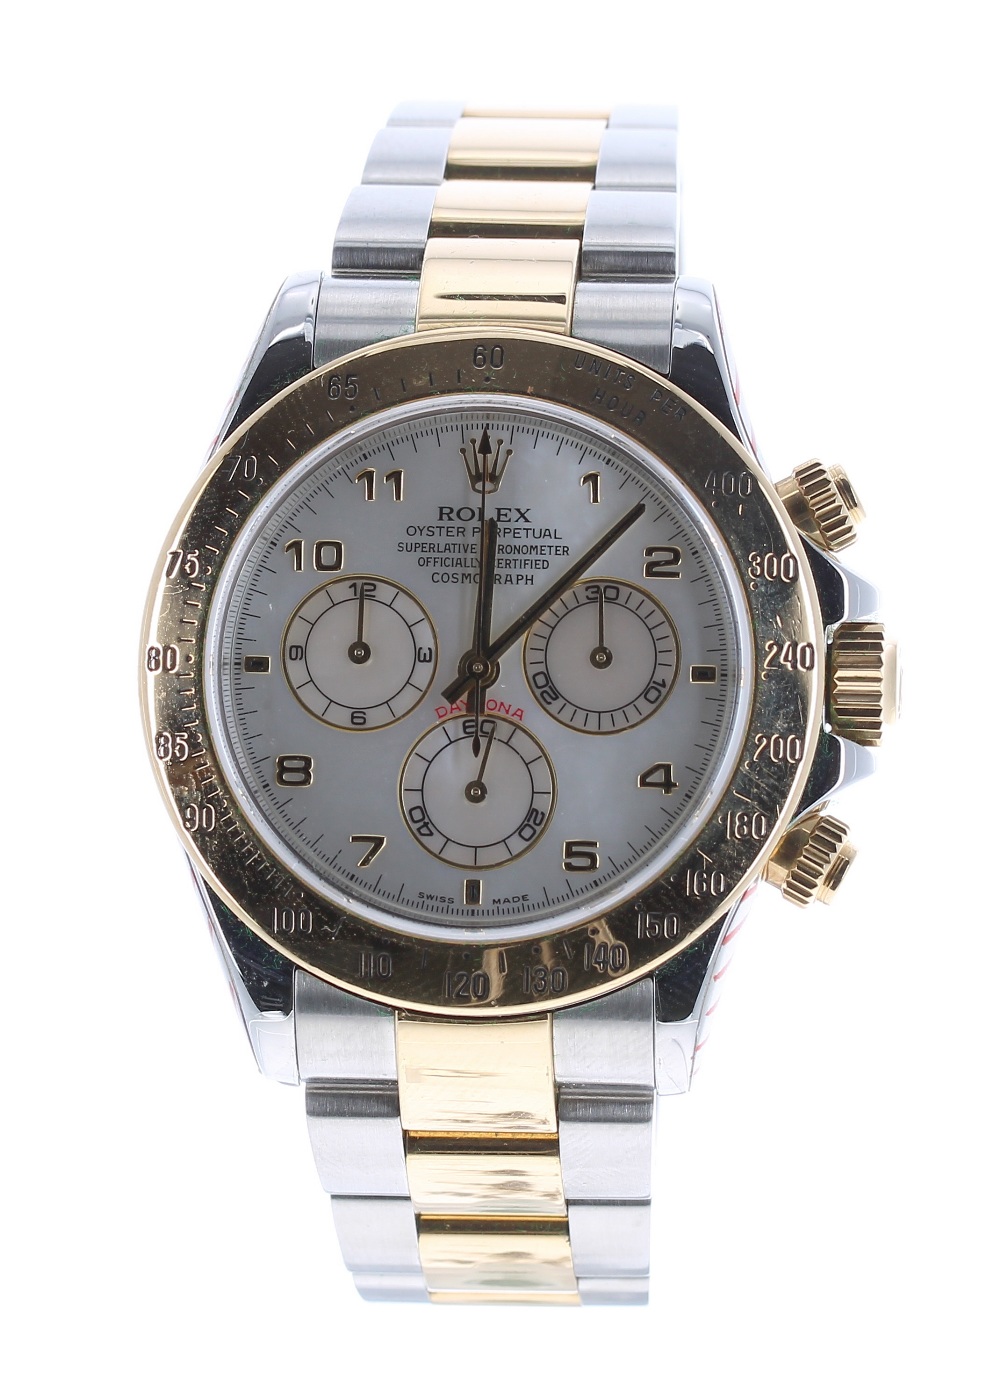 Rolex Oyster Perpetual Cosmograph Daytona stainless steel and gold gentleman's bracelet watch, - Image 2 of 6